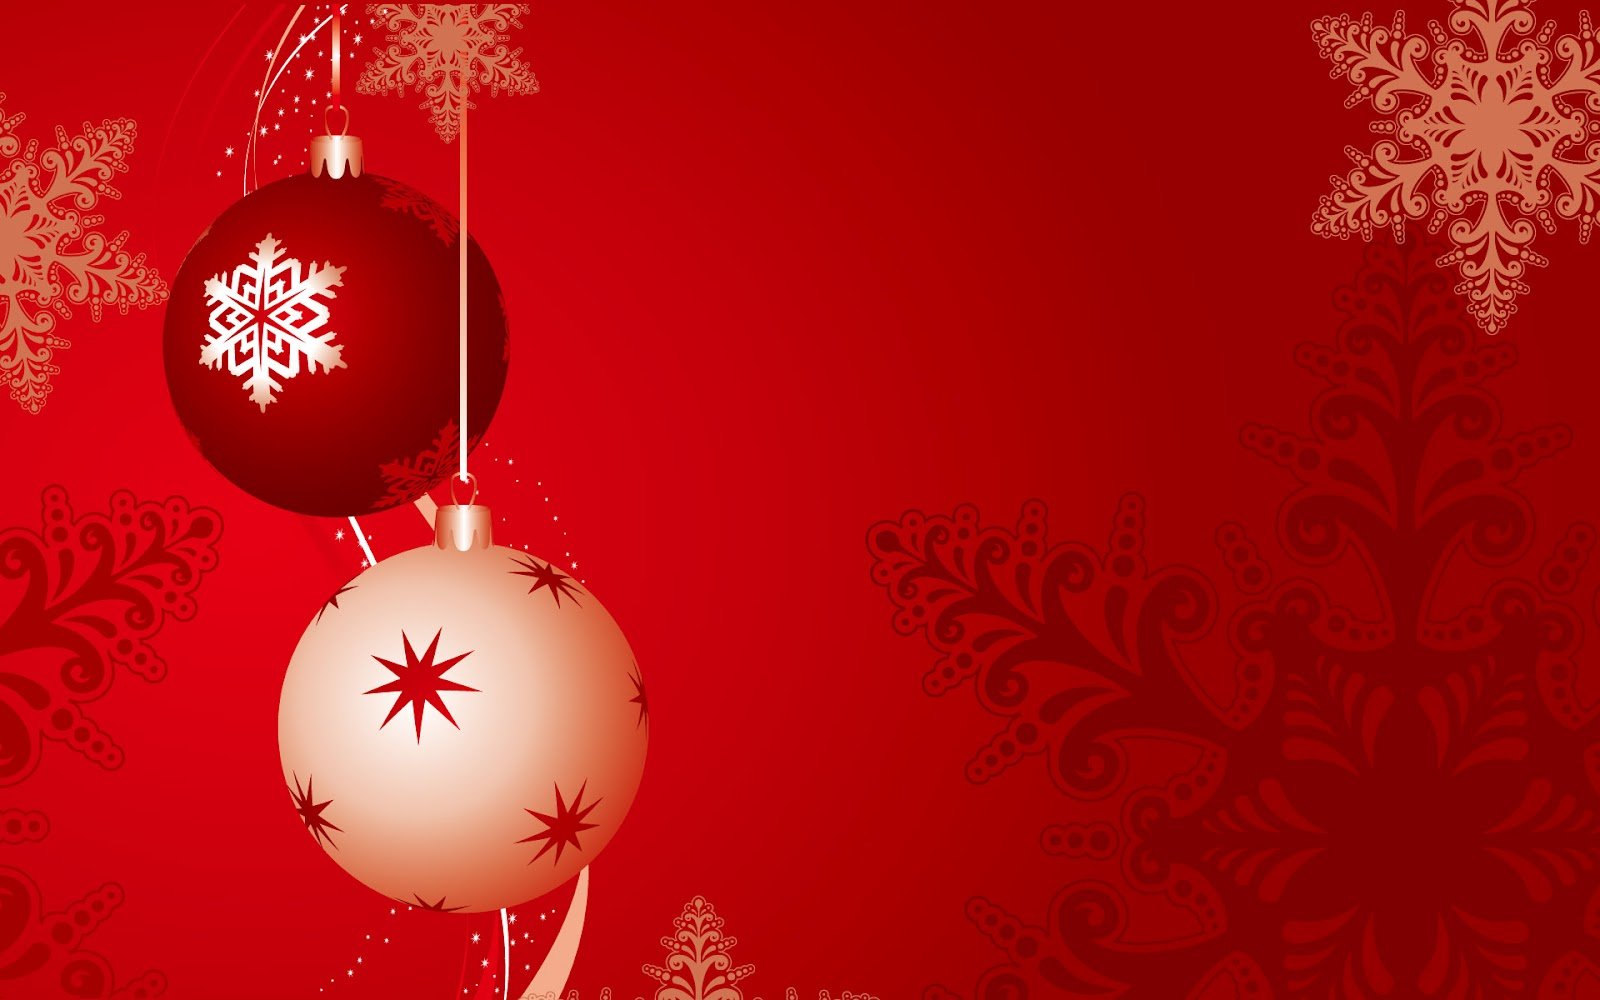 Cute Christmas Wallpaper 7911 Hd Wallpapers in Celebrations   Imagesci